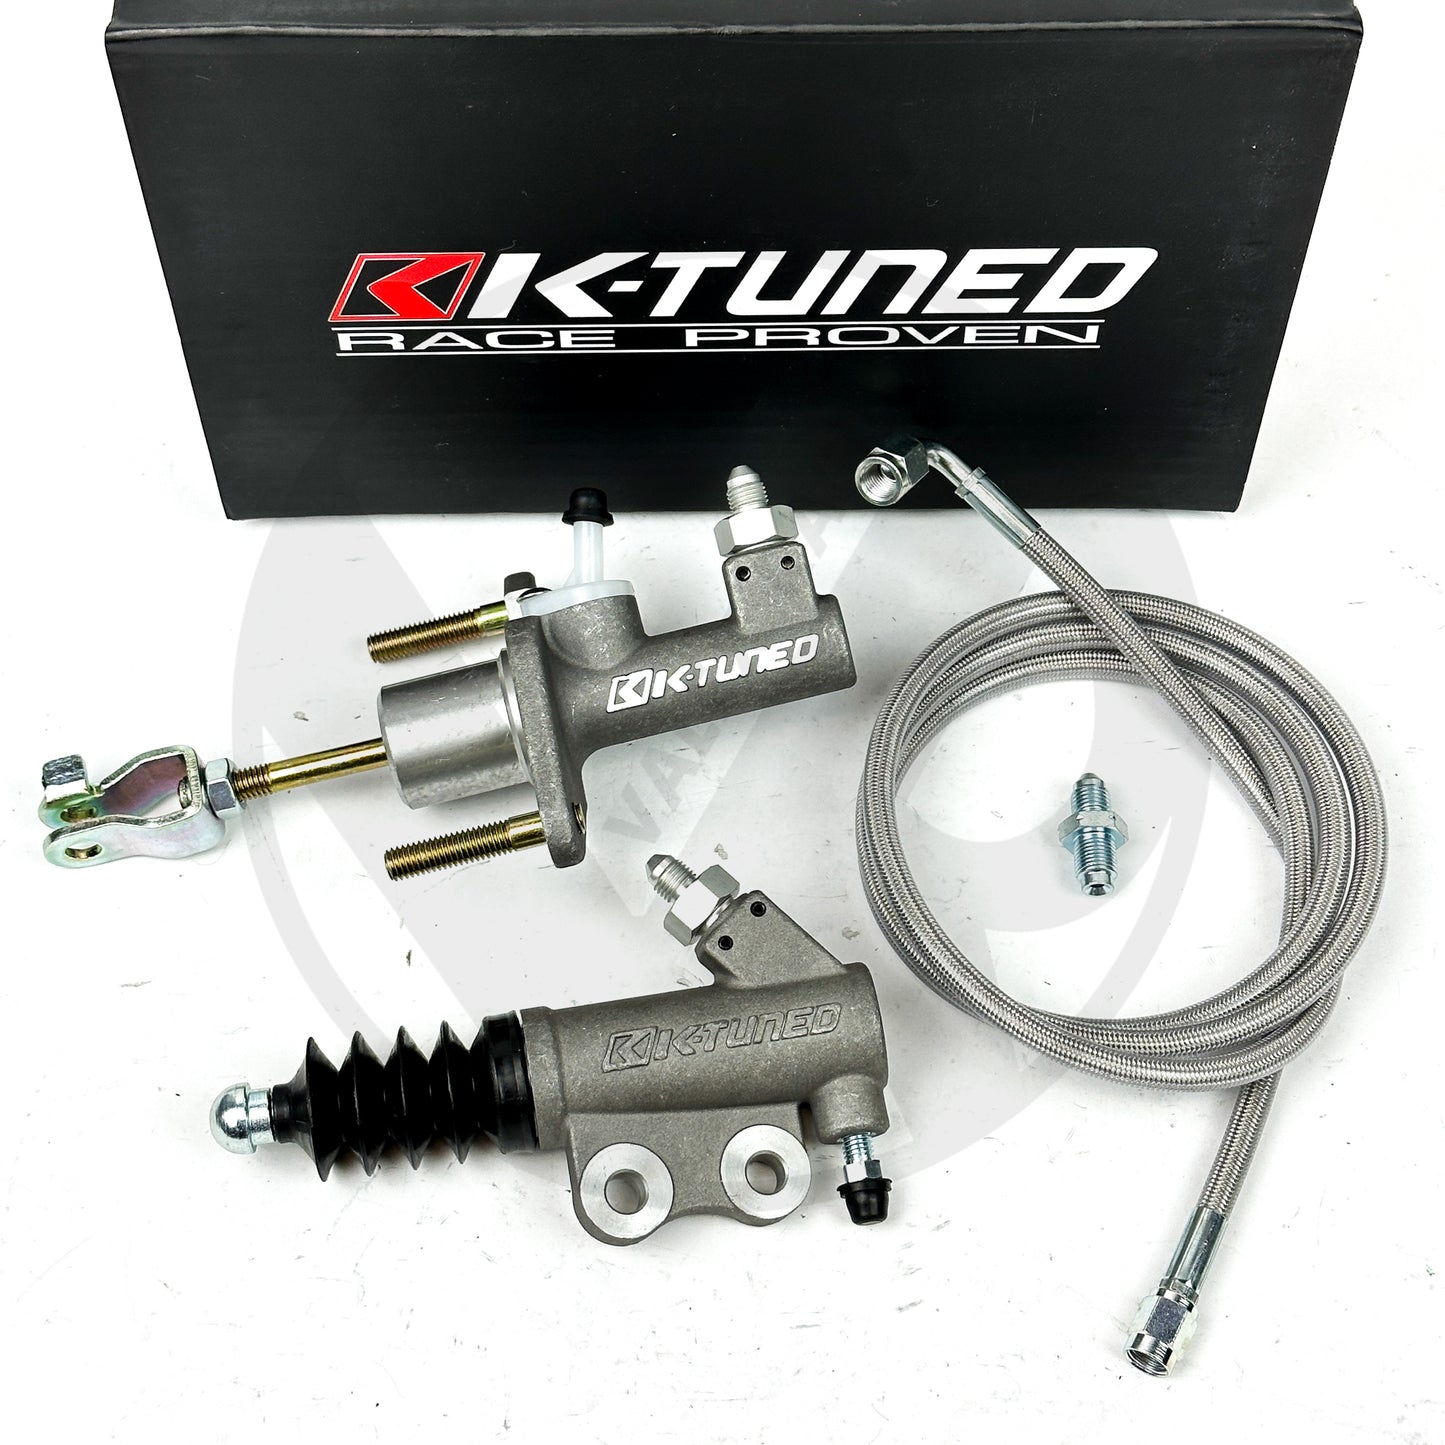 K-Tuned EM2 Clutch Master & Slave Cylinder Kit for 94-01 Acura Integra with Stainless Steel Clutch Line